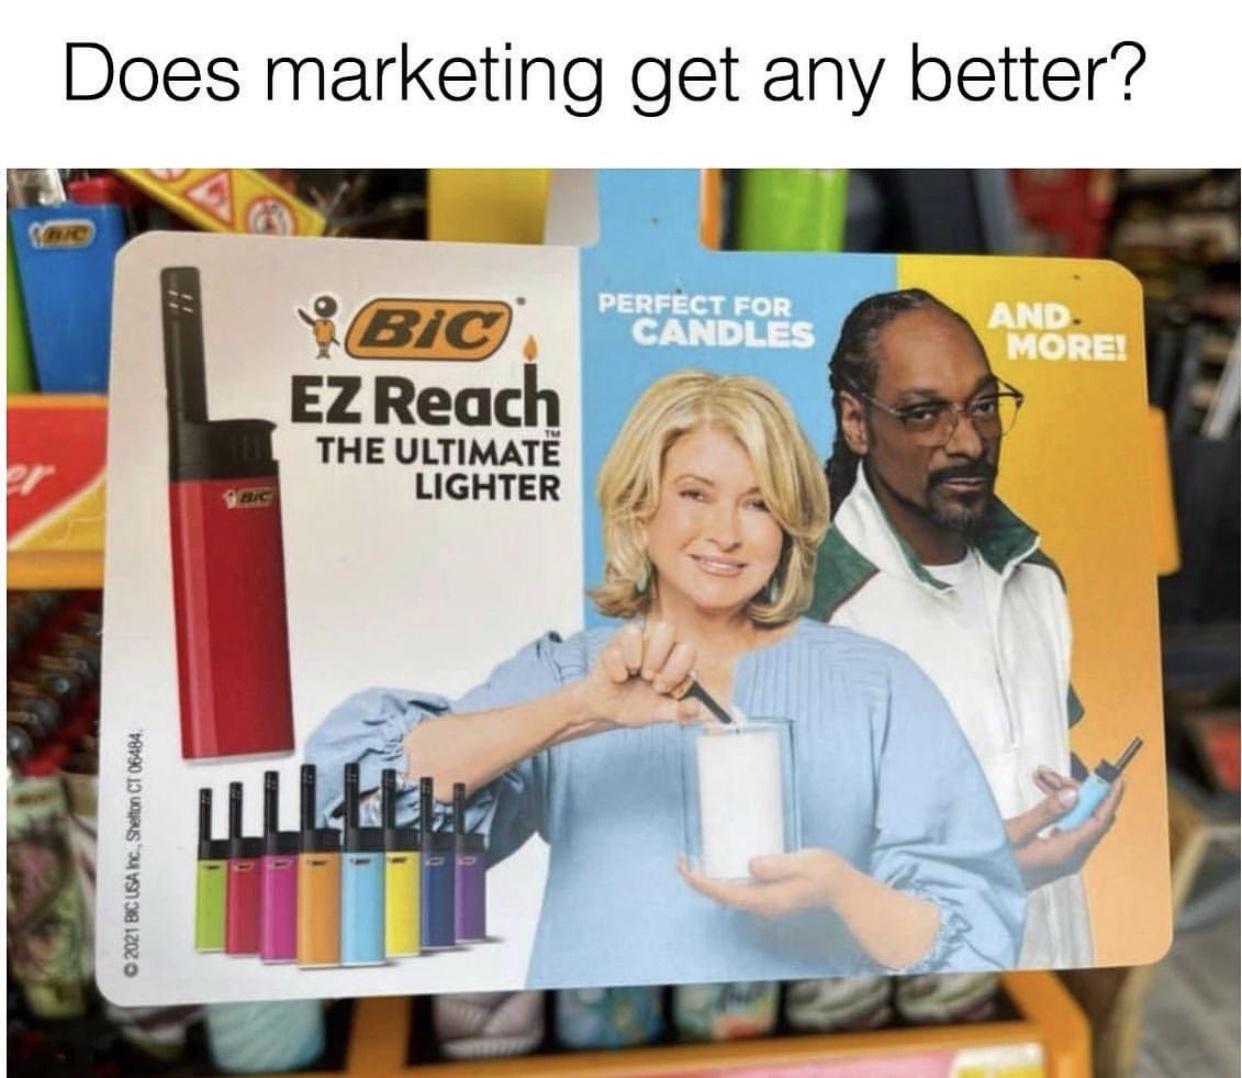 perfect for candles and more - Does marketing get any better? care Perfect For Candles And More! Bic Ez Reach The Ultimate Lighter 2 2021 Bic Usa Inc., Shelton Ct 06484